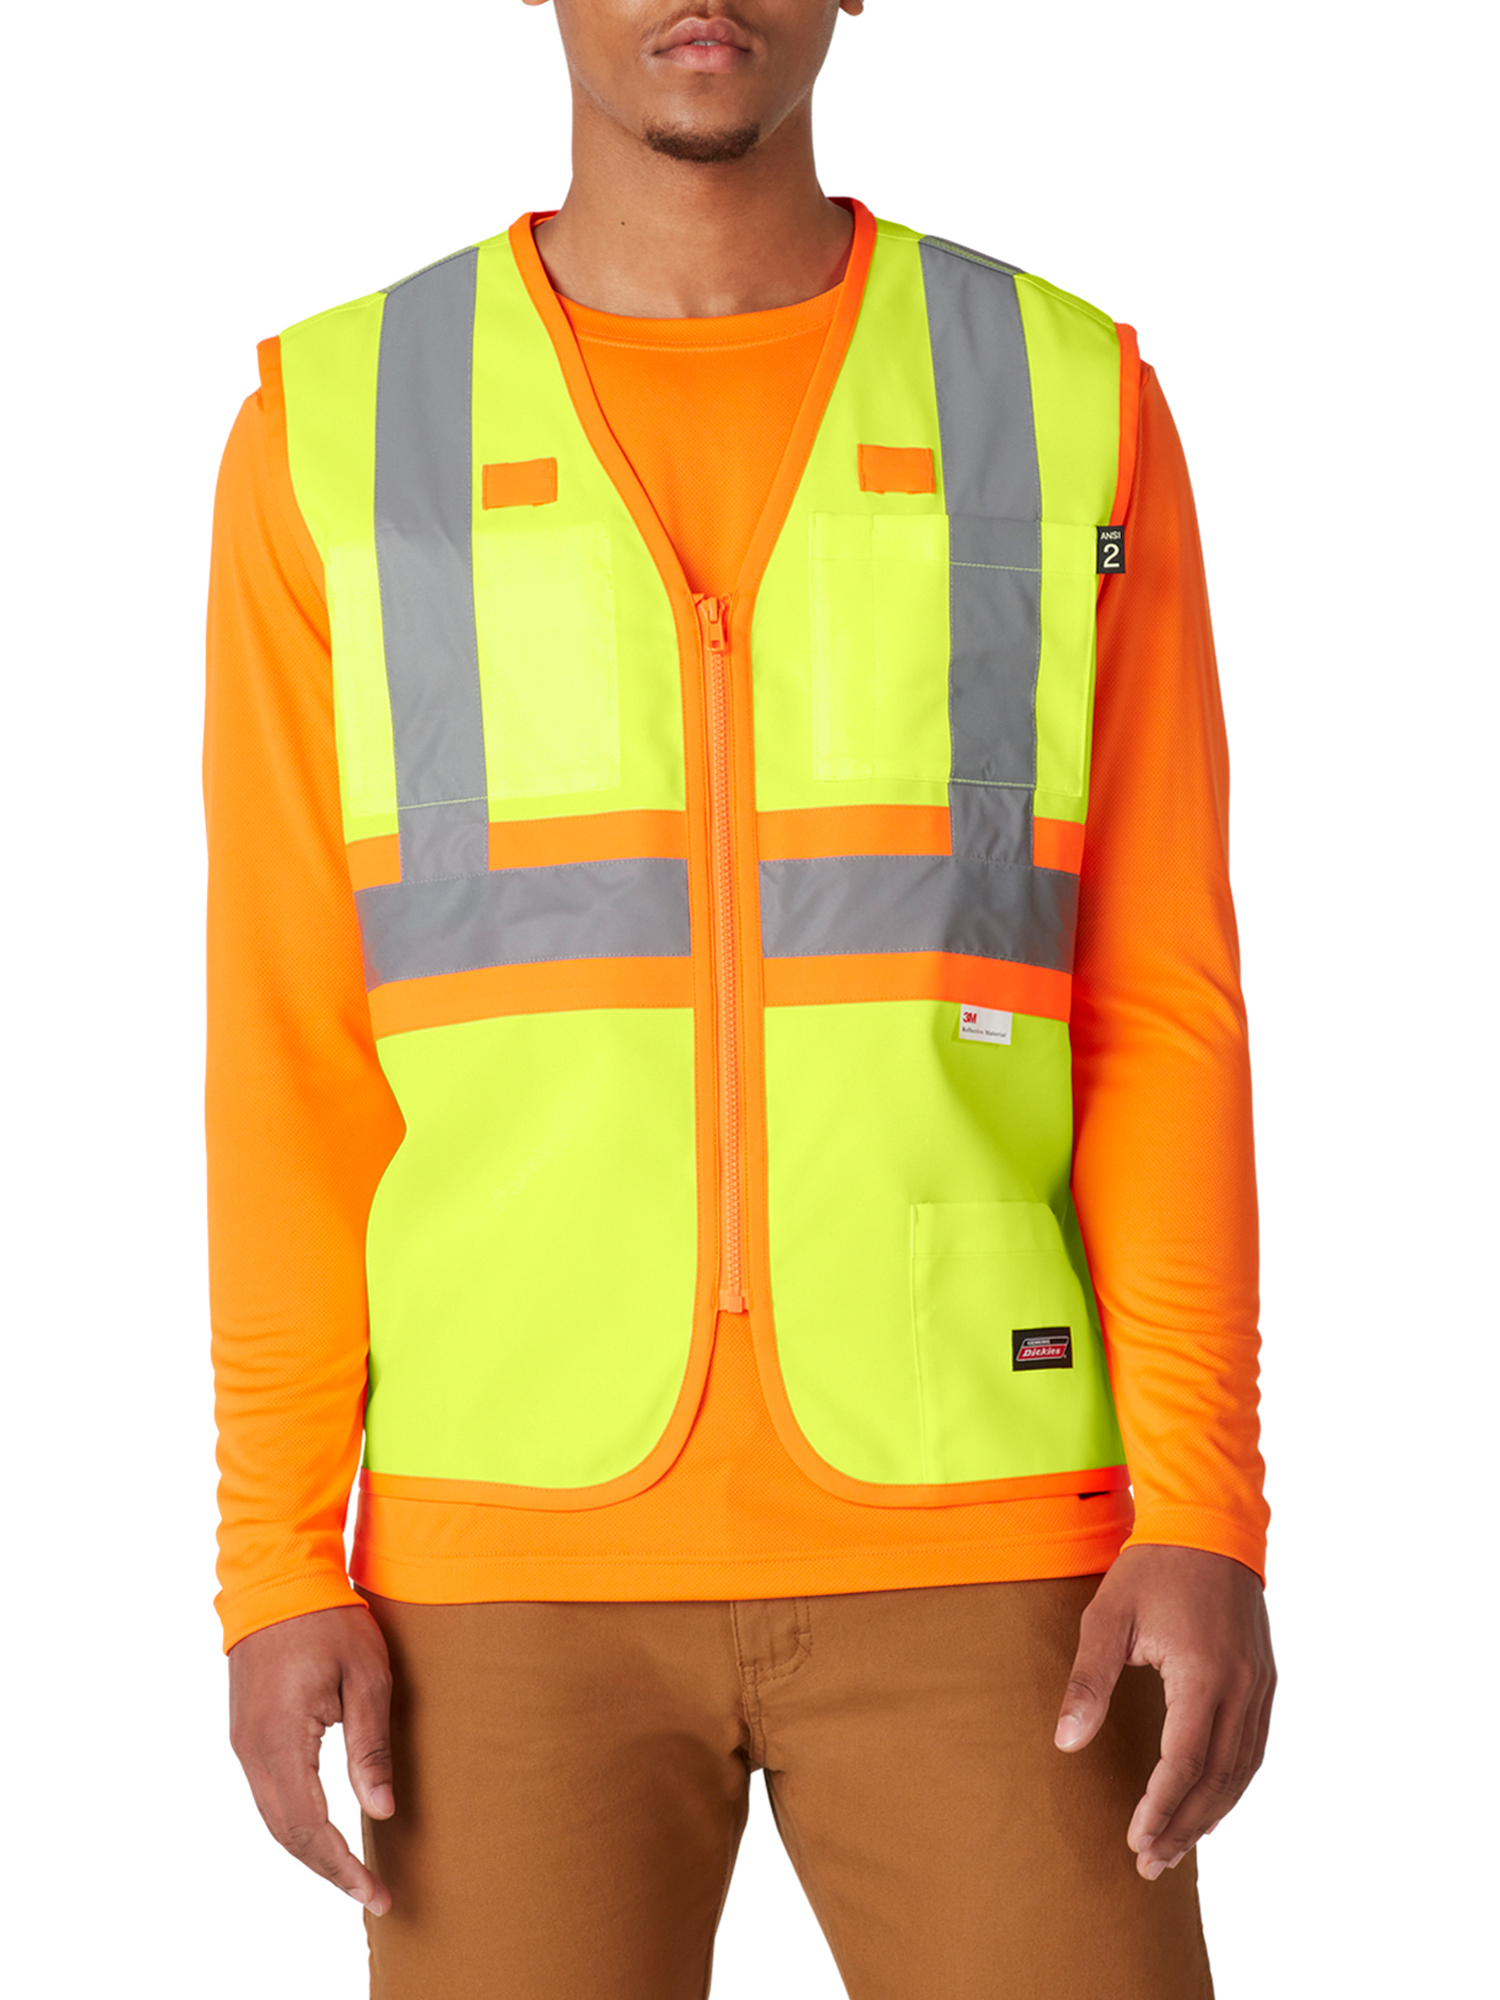 Genuine Dickies Safety Vest, Hi-Vis Synthetic Vest, 3M™ Scotchlite™ Reflective Taping, ANSI Class 2 - image 1 of 6